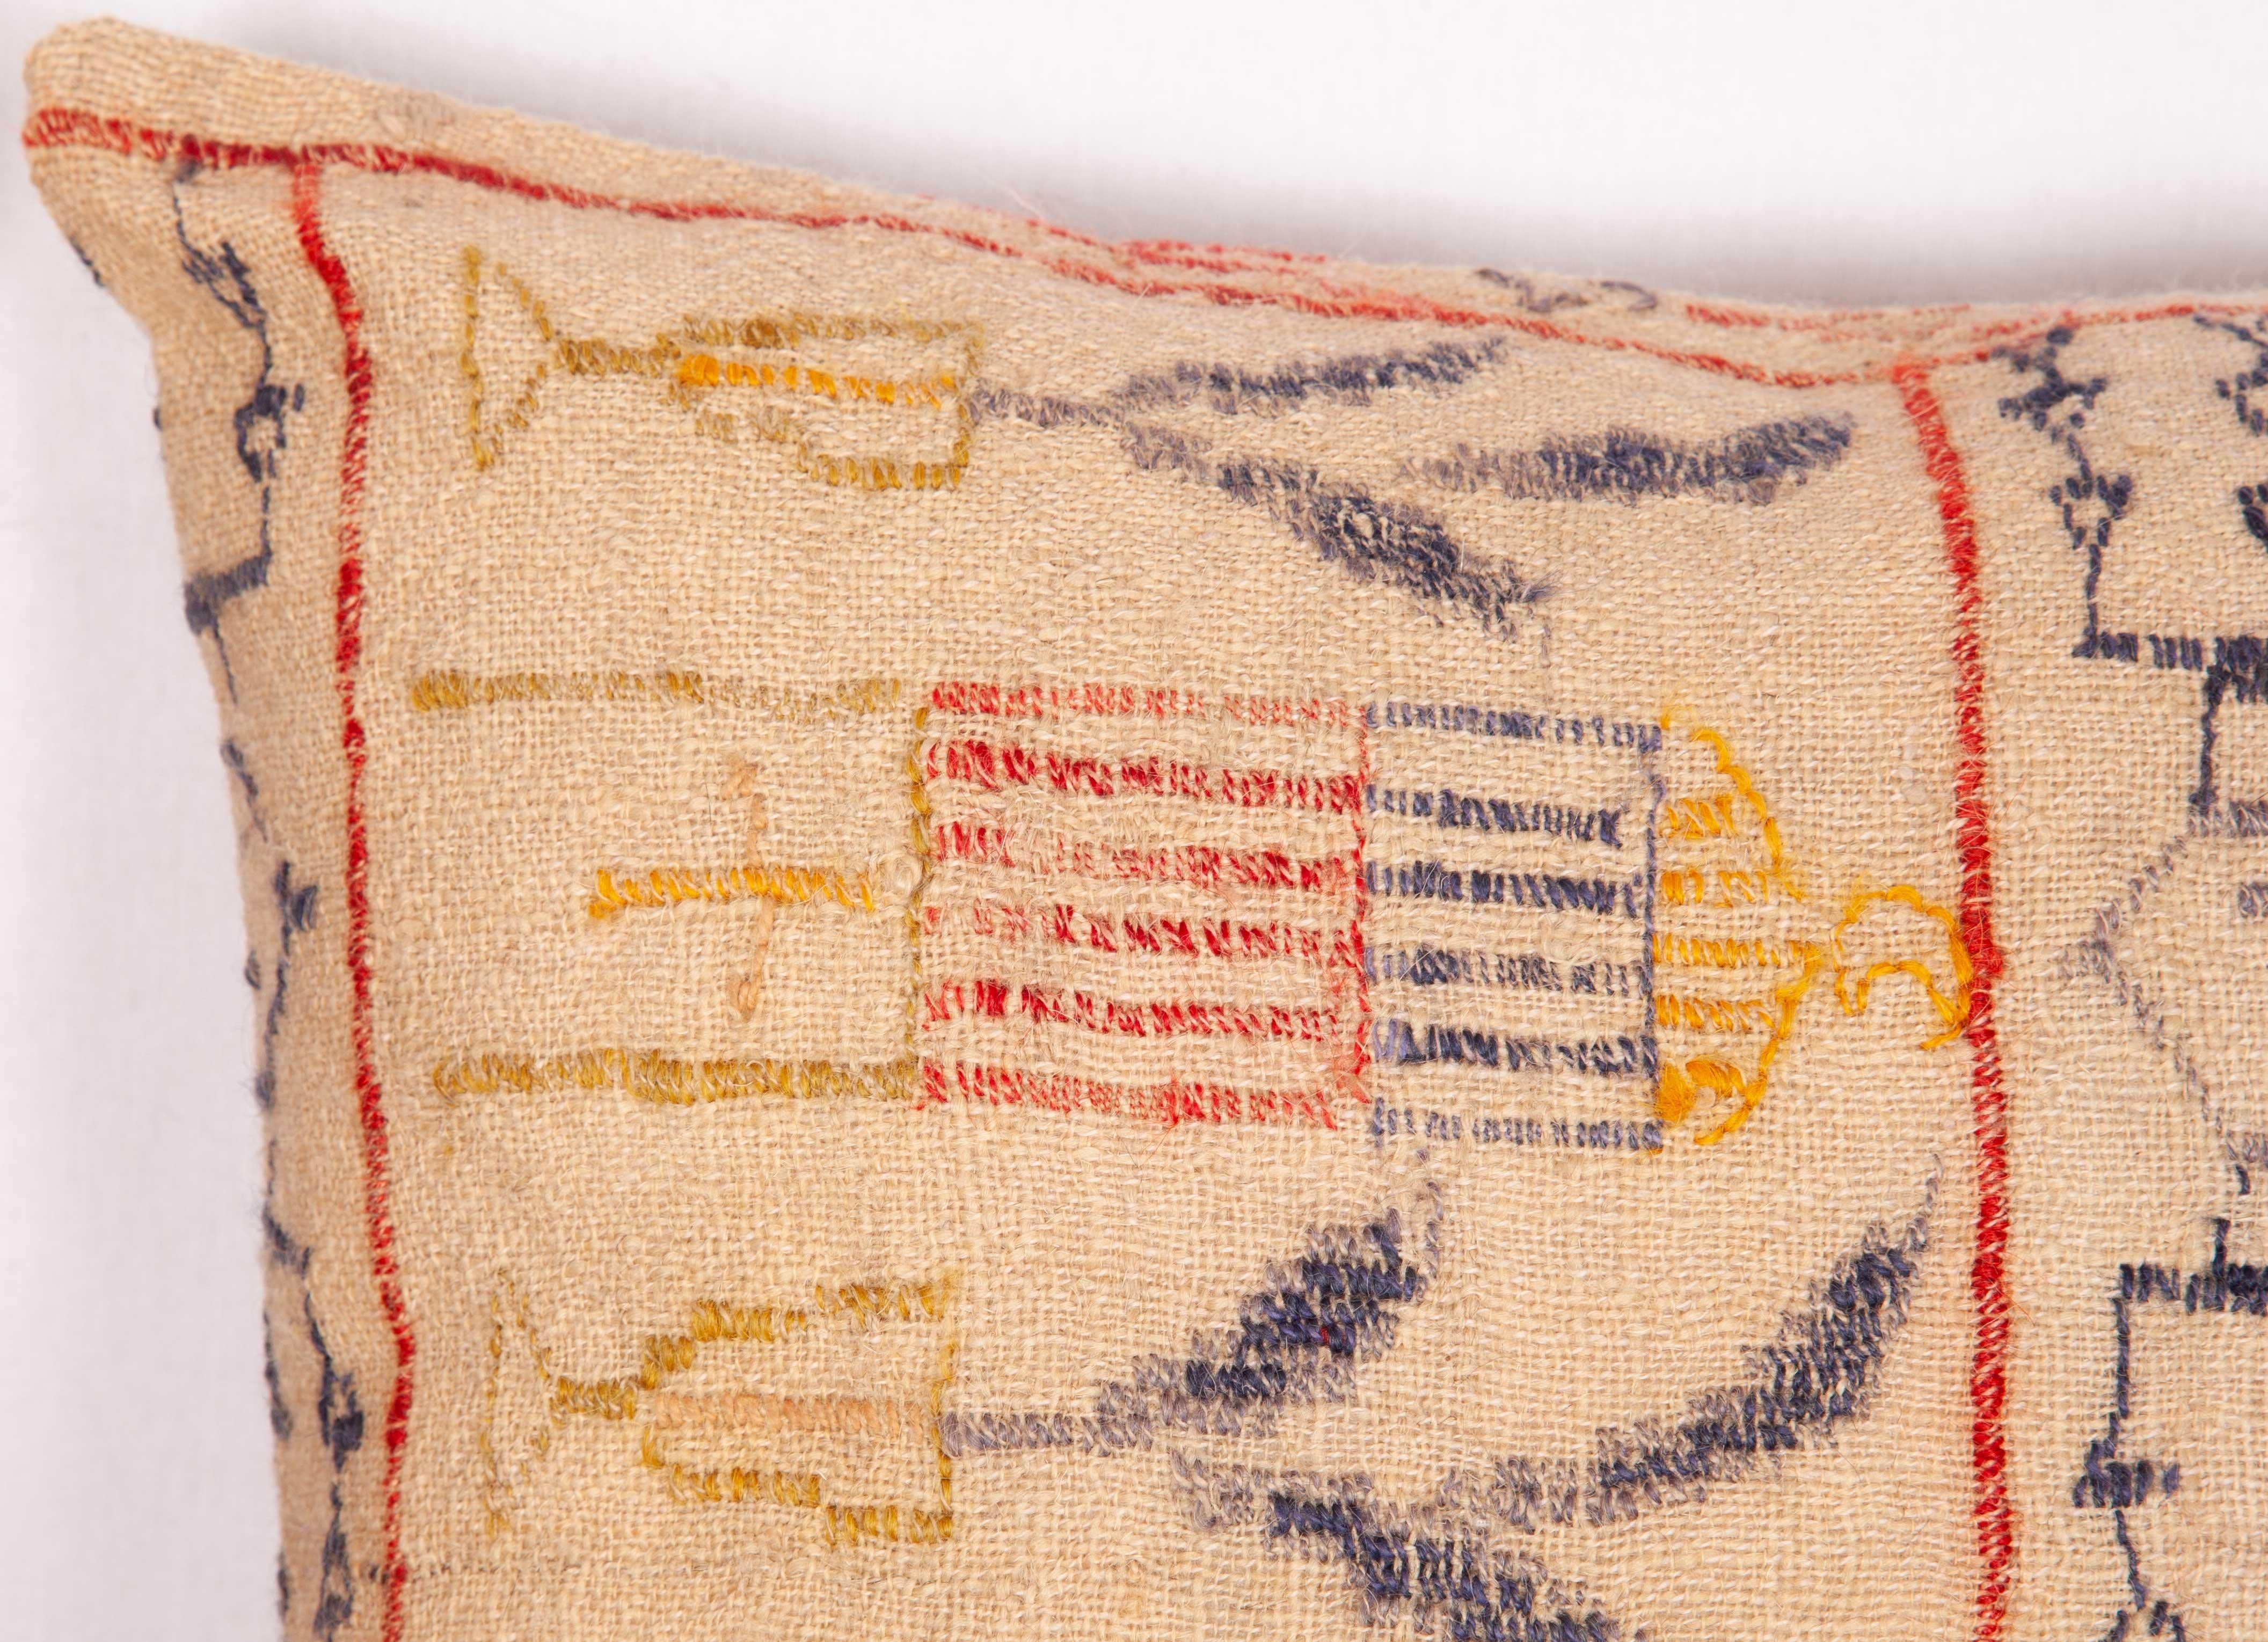 Hand-Woven Kilim Pillow Cases Fashioned from a South East Anatolian Kilim